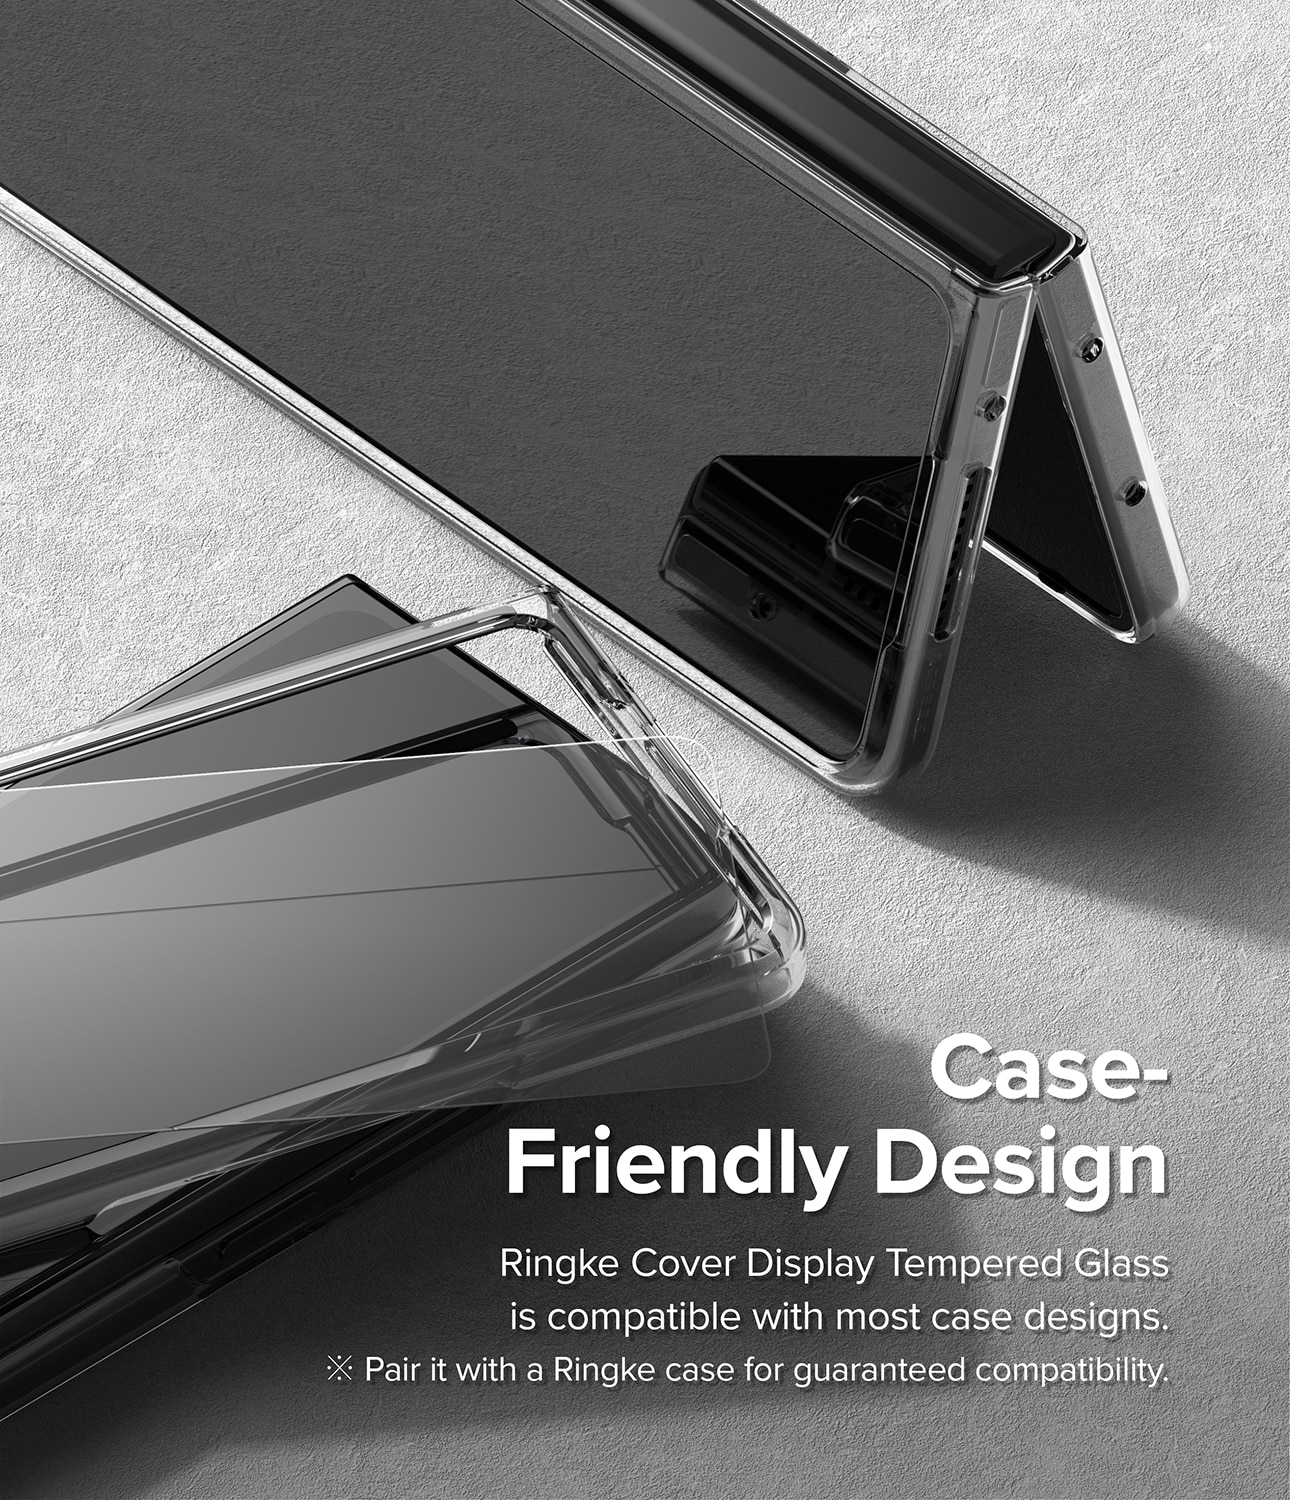 Samsung Galaxy Z Fold 4 Cover Display Tempered Glass